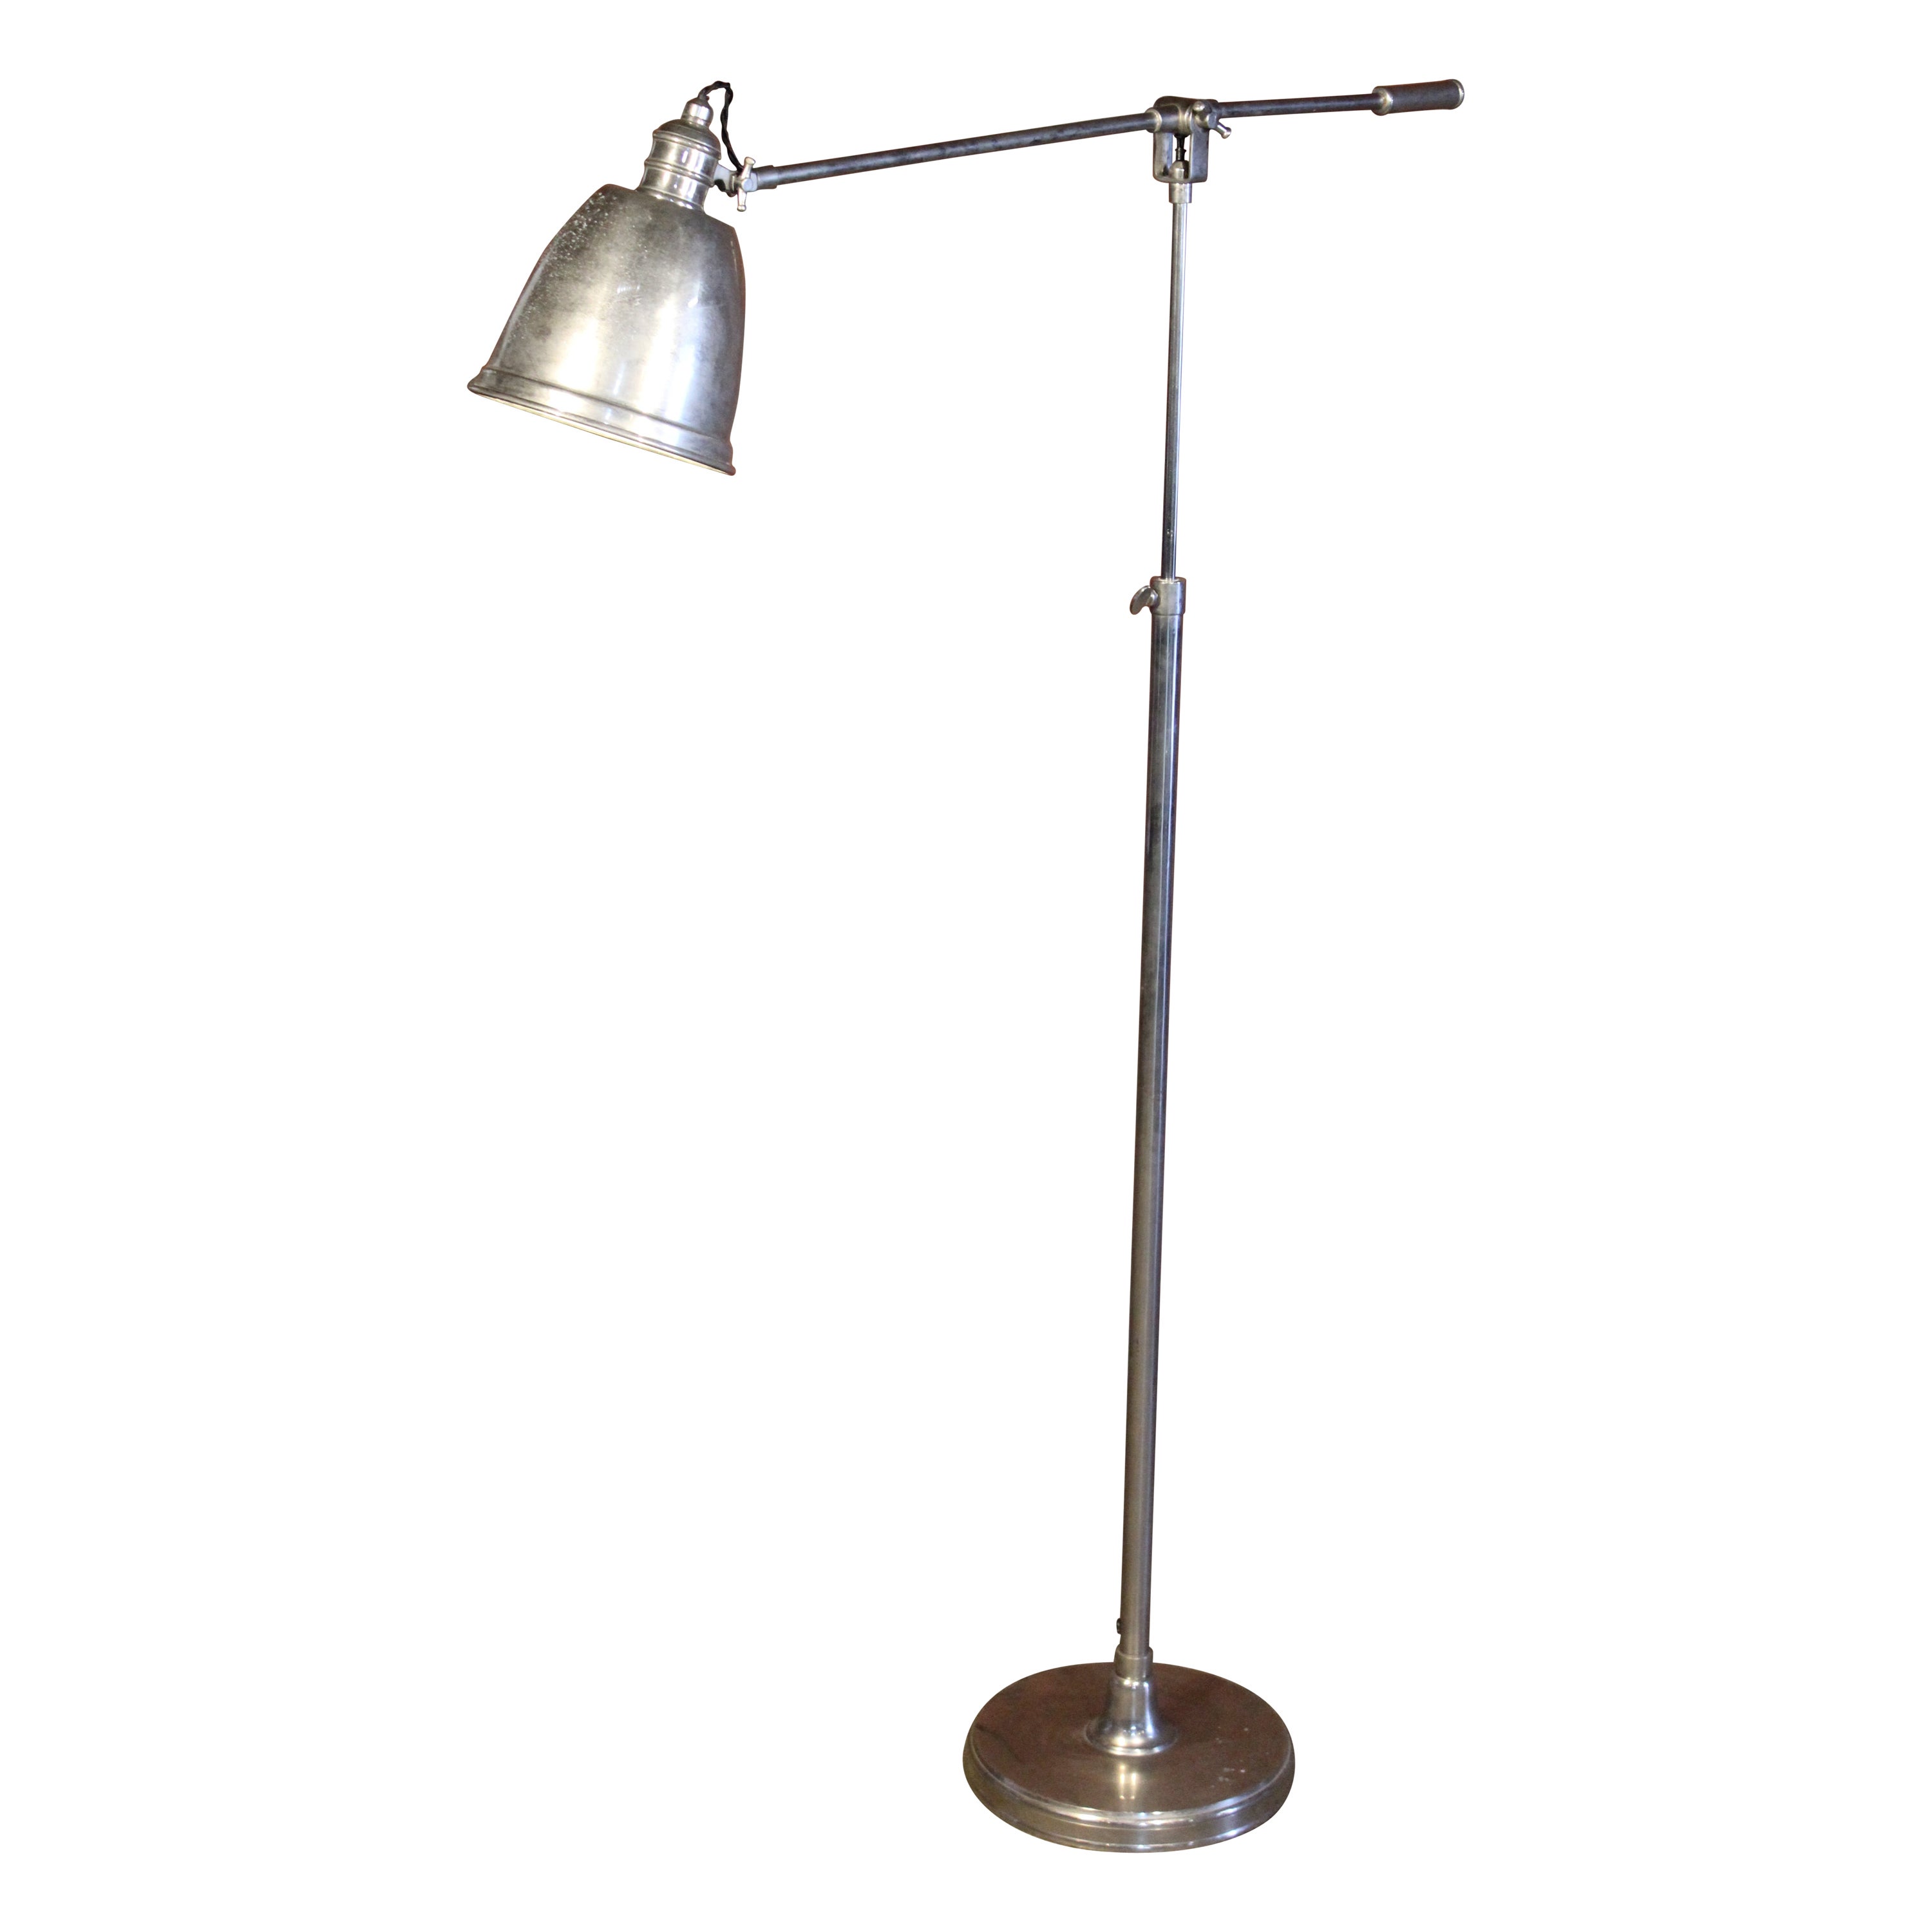 Vintage French Nickel Plated Adjustable Reading Floor Lamp, 1940s